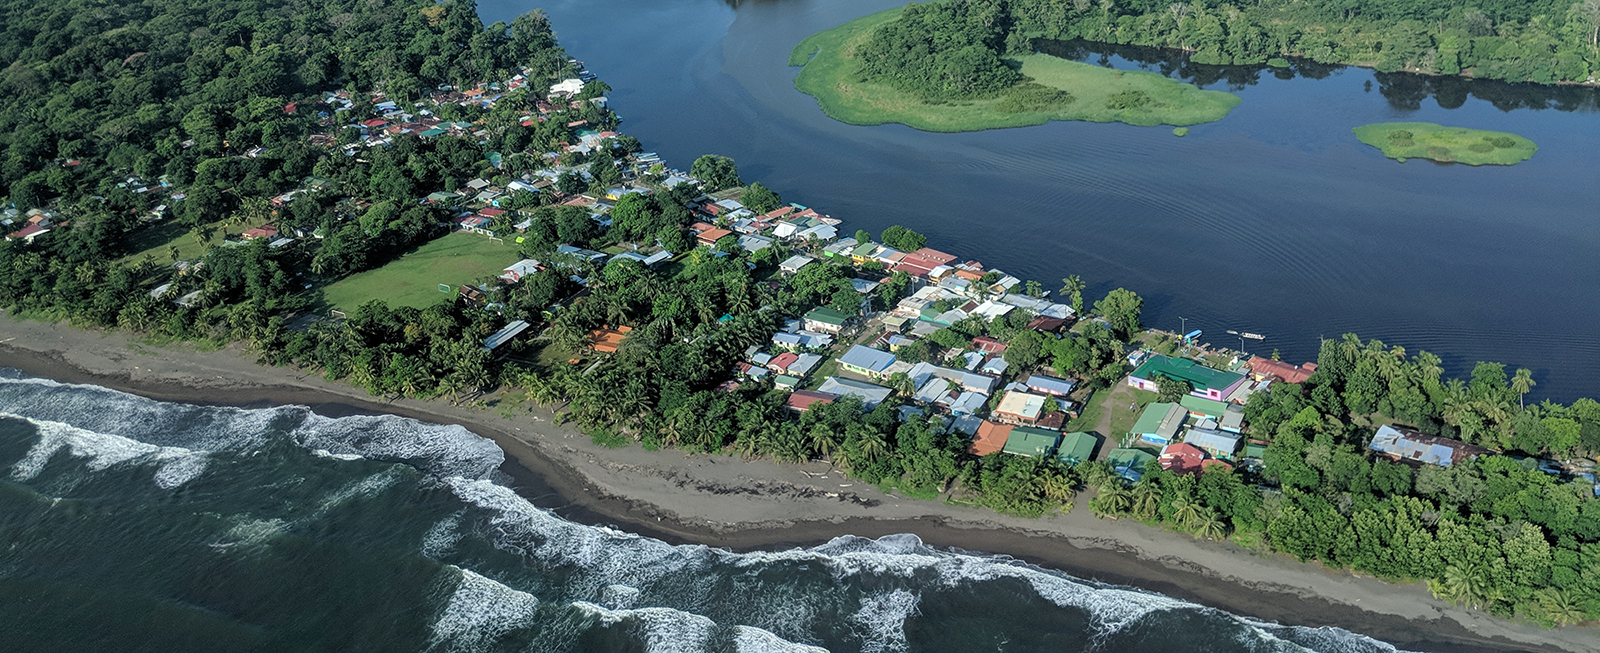 Tortuguero National Park to/from Cahuita – River Boat Shuttle to the “Costa Rica’s Amazon”